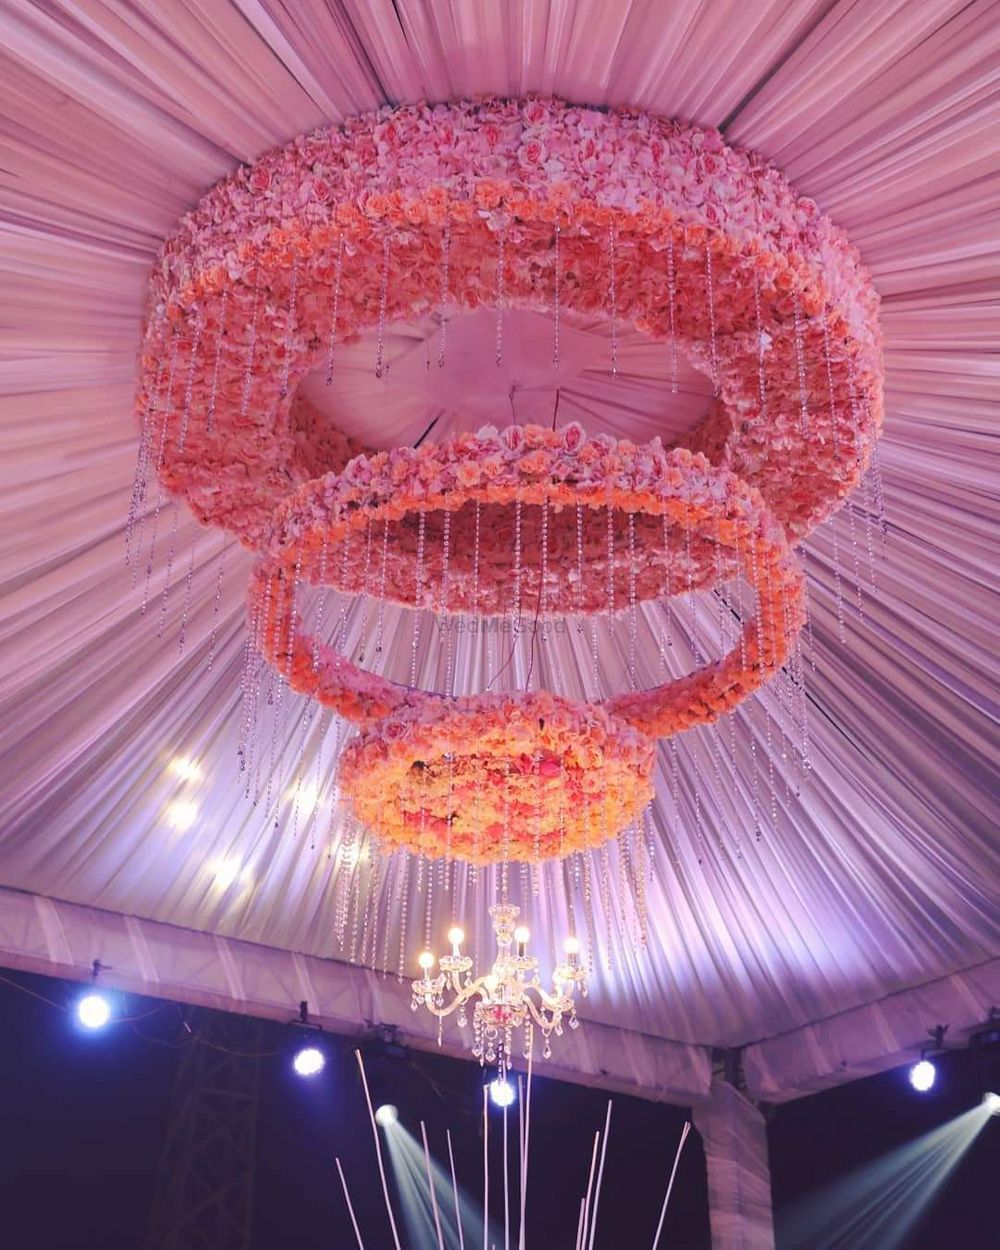 Photo By Dazzling Events Decor & Caterers - Wedding Planners